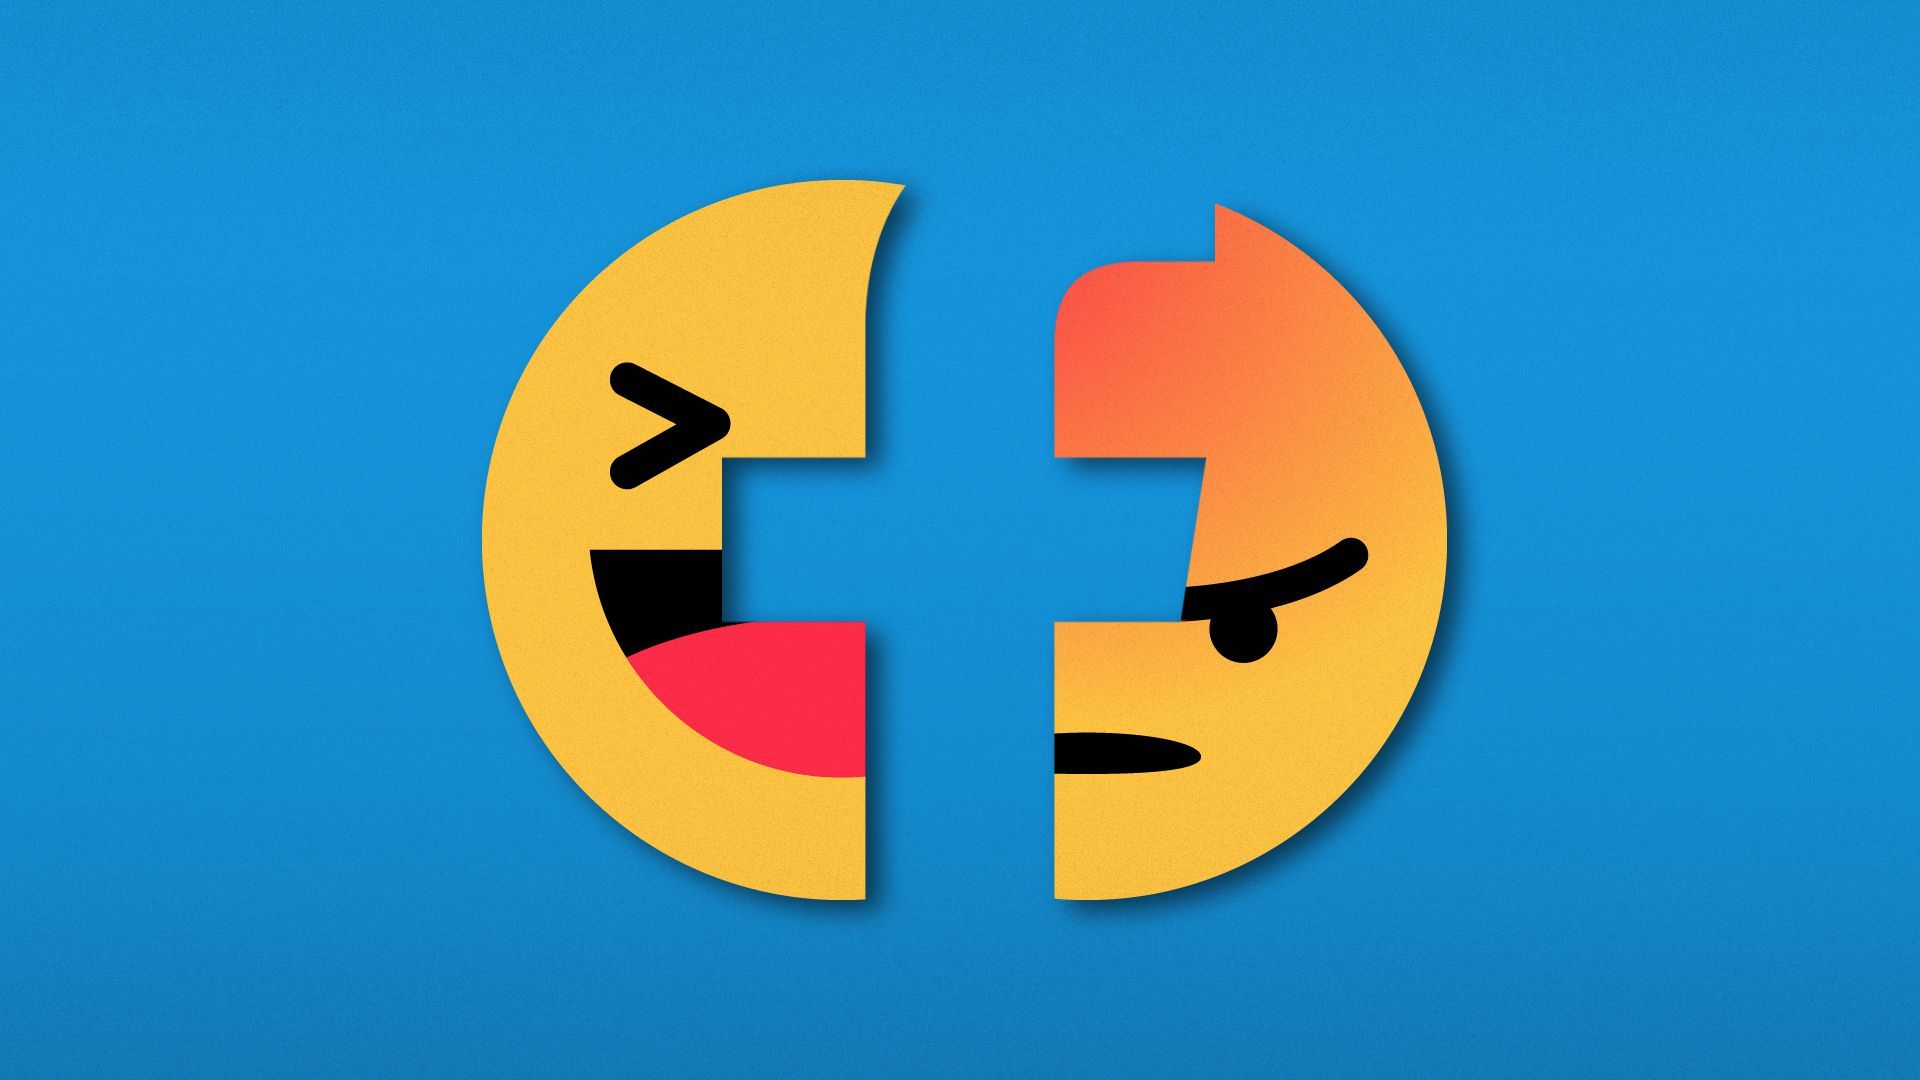 Illustration of the Facebook logo with a laughing emoji on one side and an angry emoji on the other.